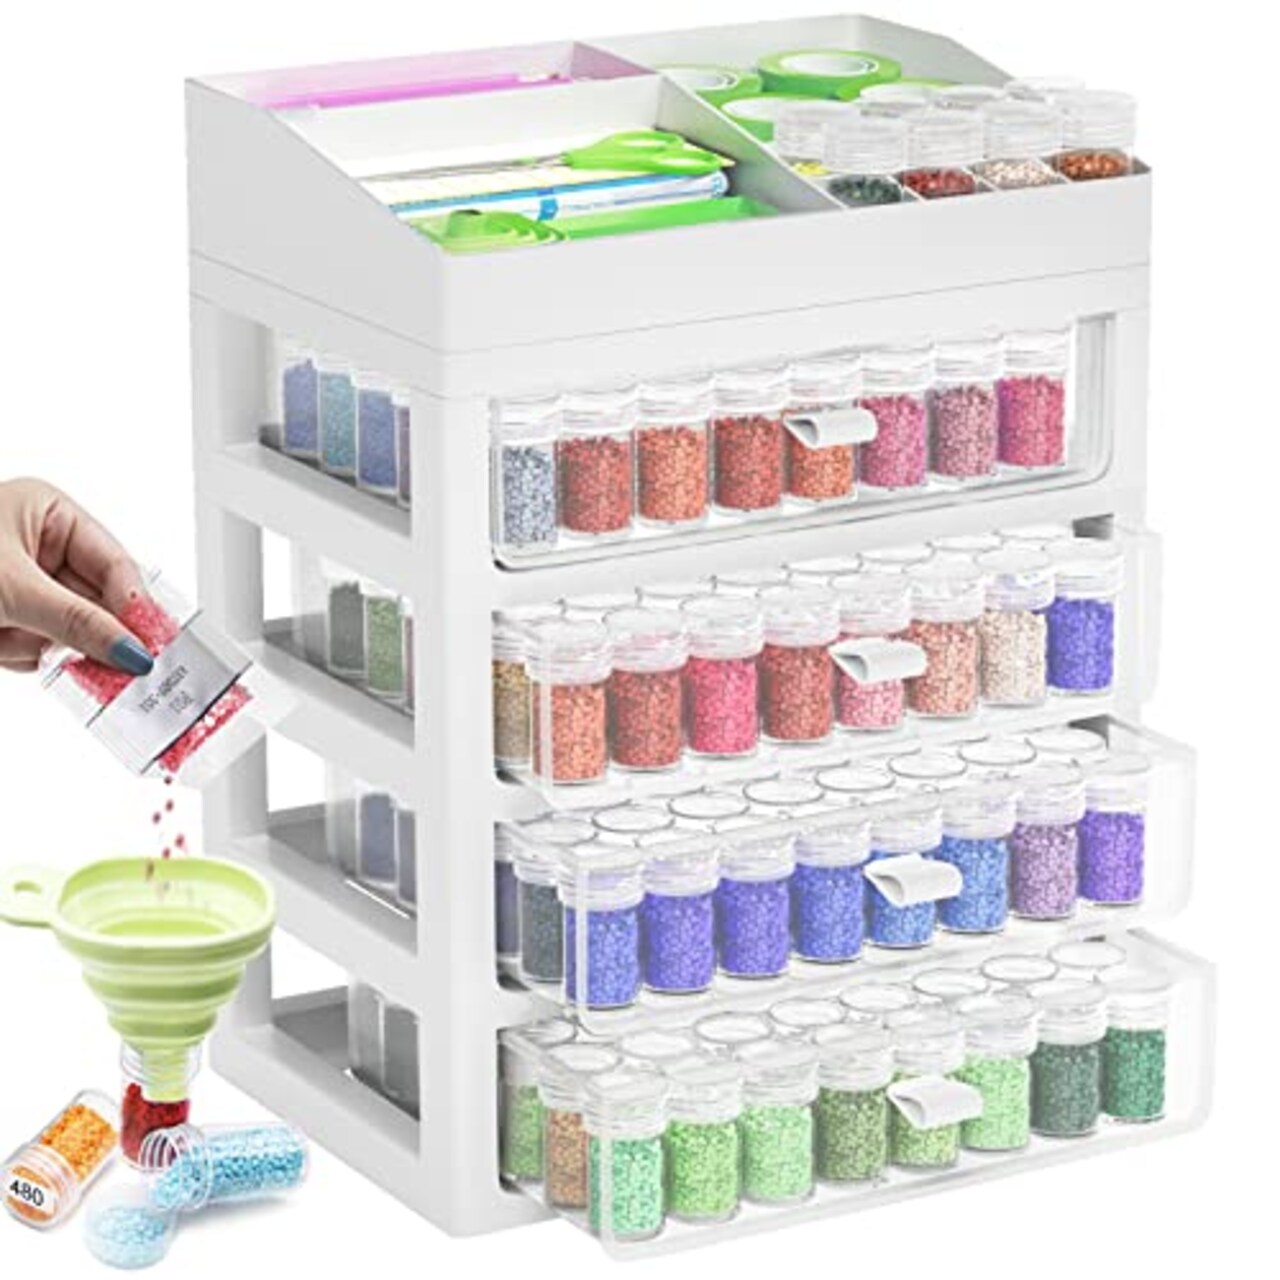 ARTDOT Storage Containers for Diamond Painting Accessories, Art